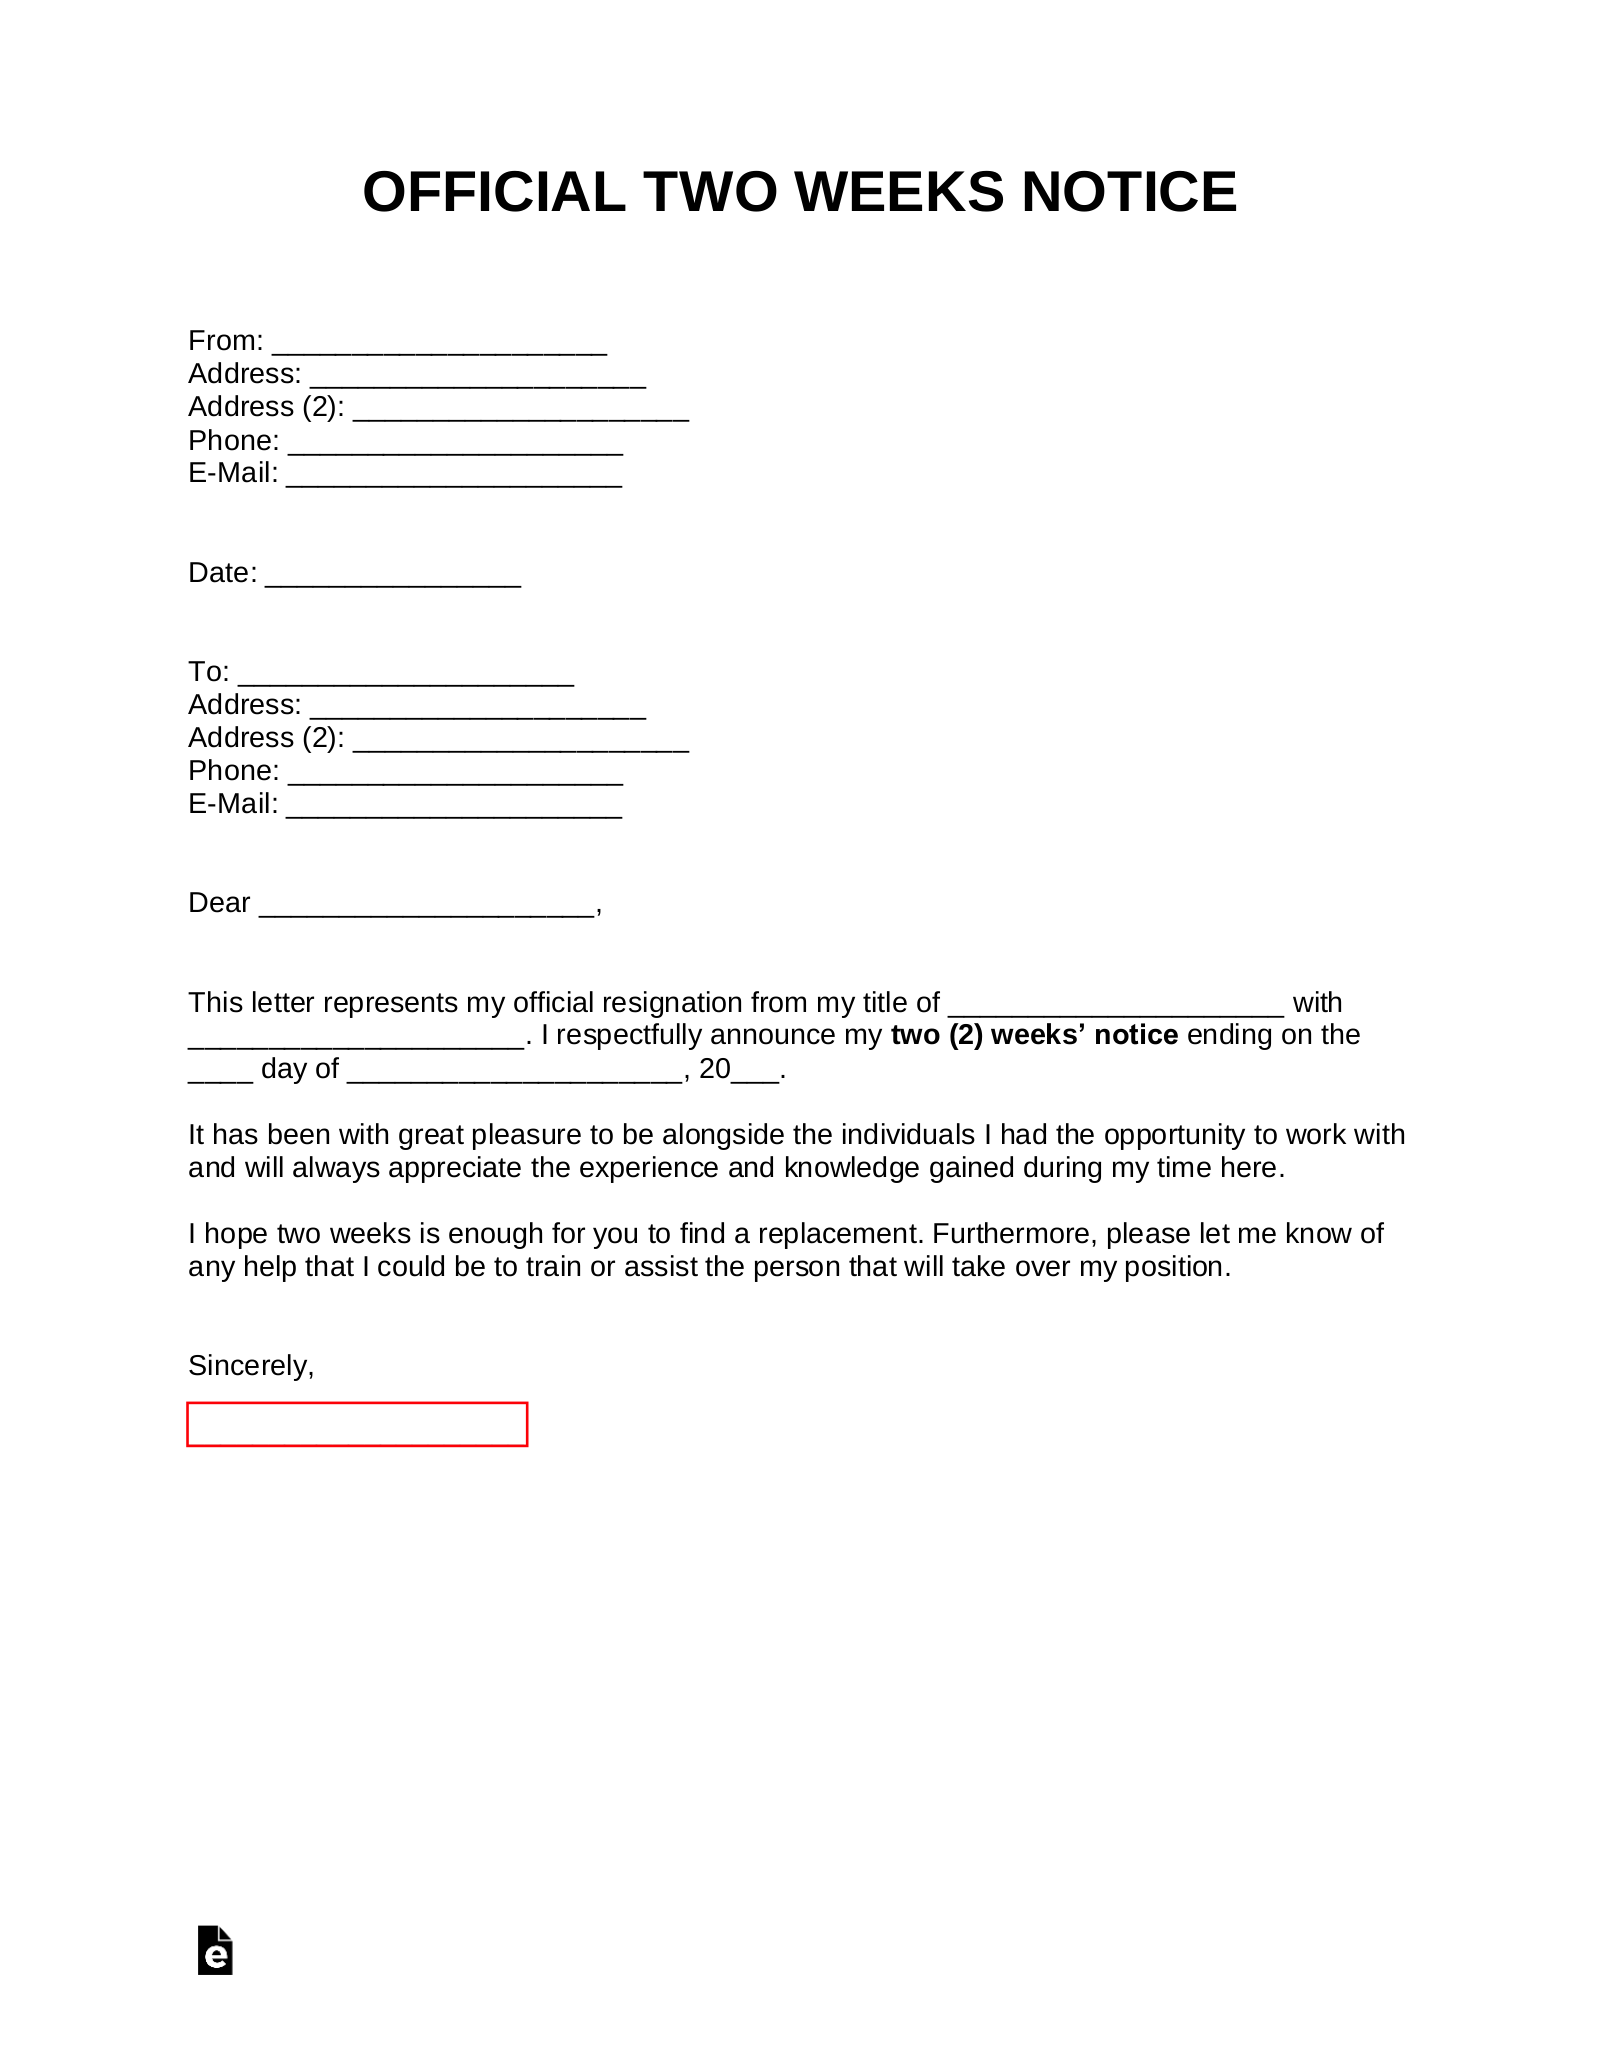 Free Two Weeks Notice Letter  Templates & Samples - PDF  Word With Regard To 2 Weeks Notice Template Word